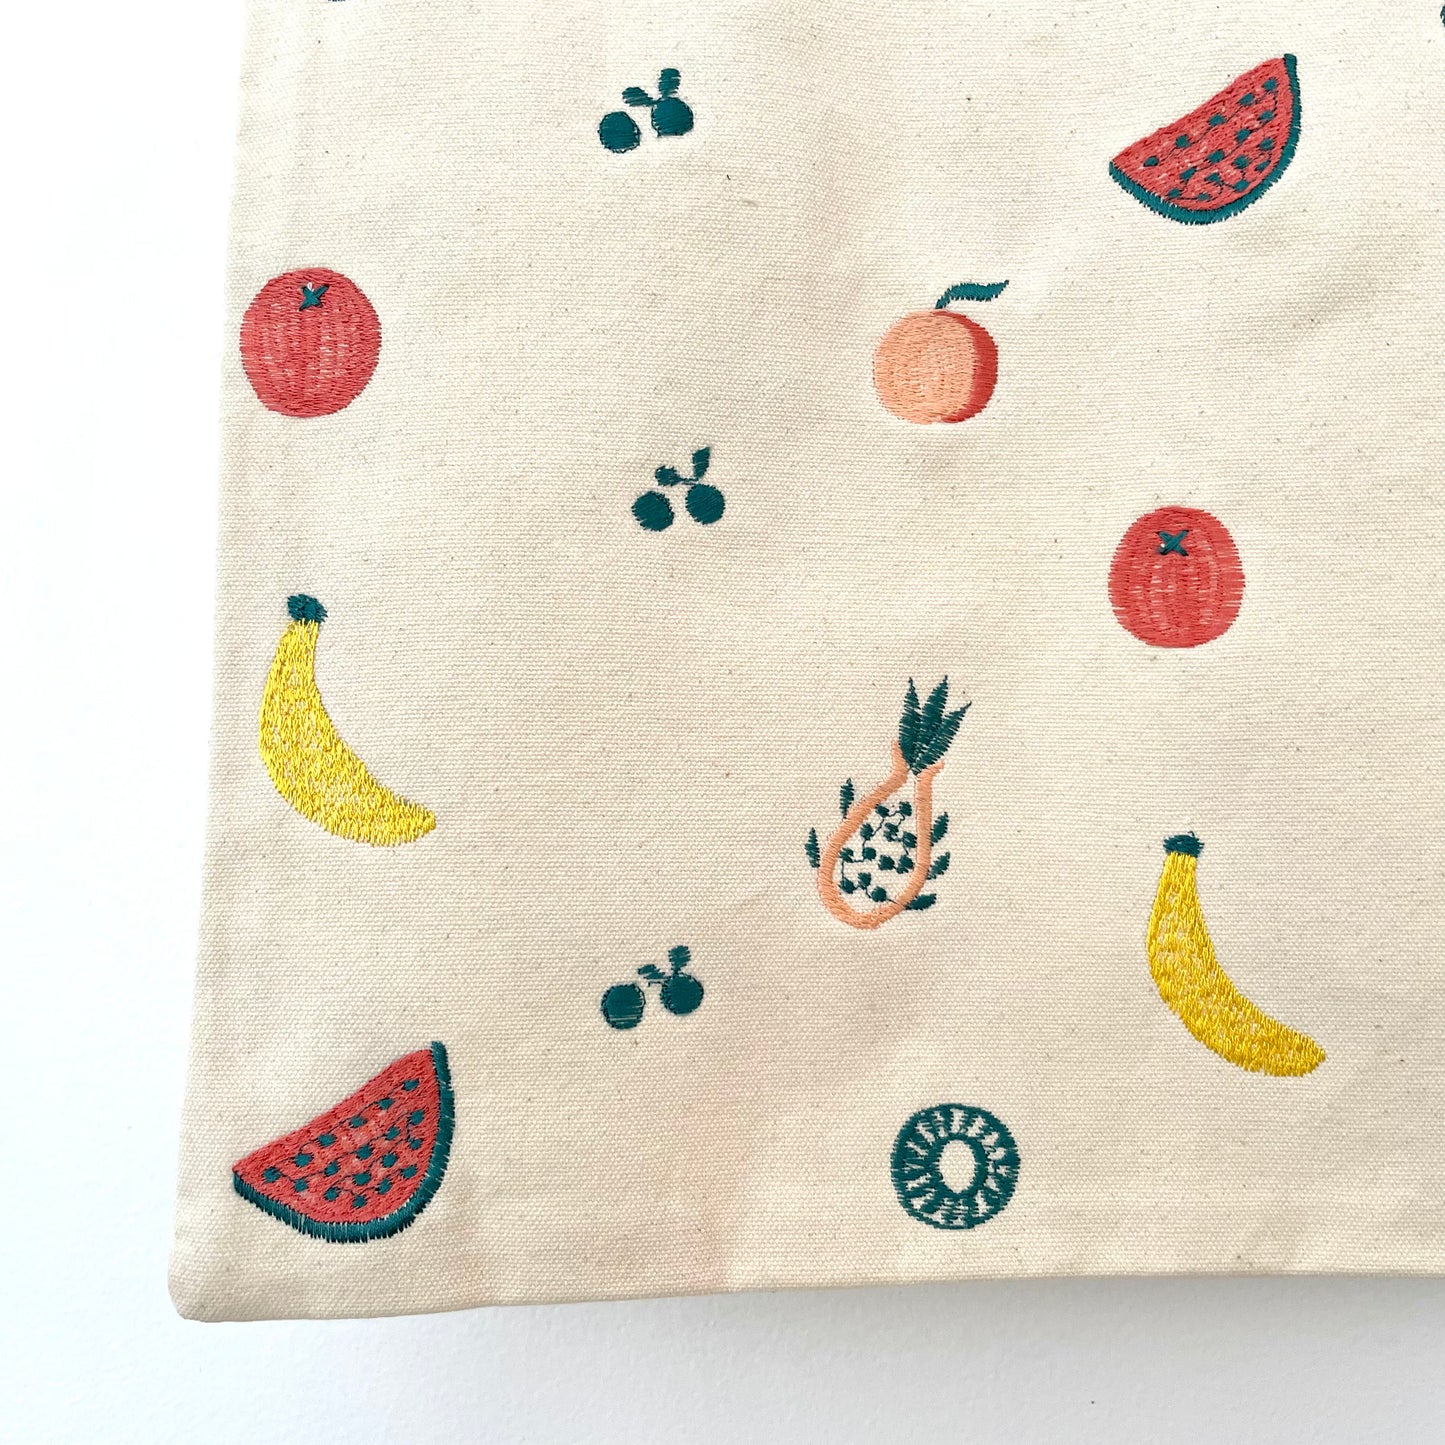 100 percent cotton fruit embroidered eco farmers market tote bag